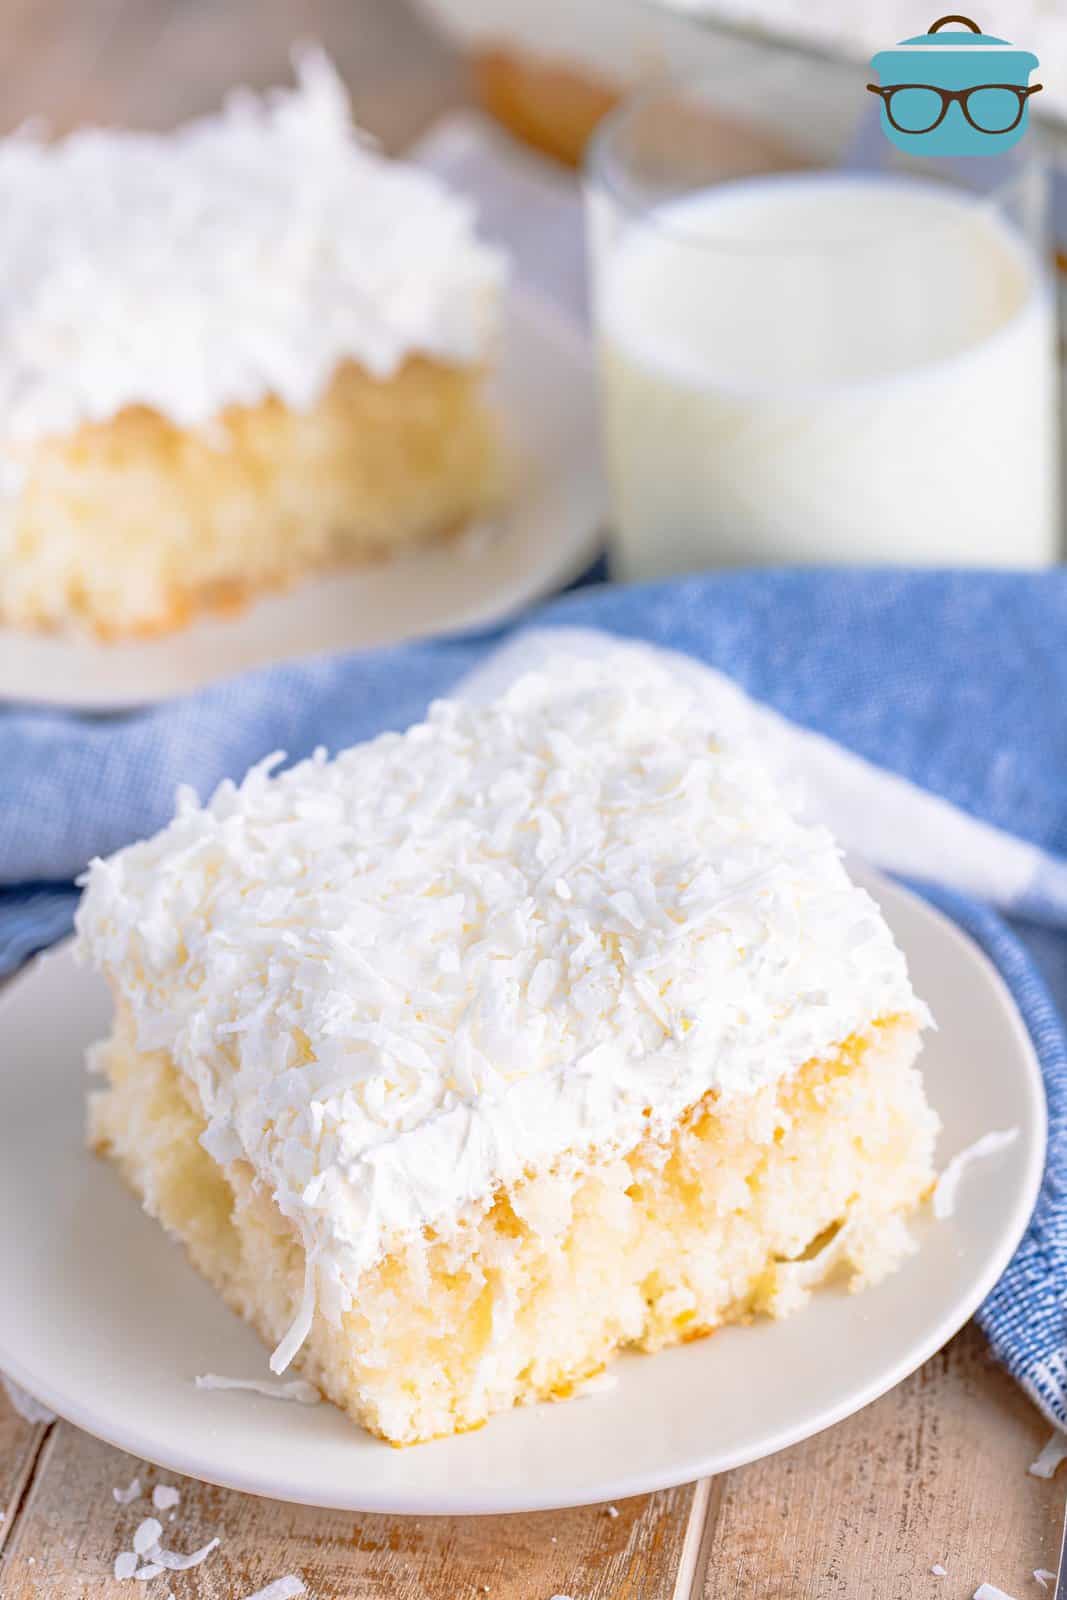 a slice of coconut cake on a small white plate with a glass of milk shown in the background.